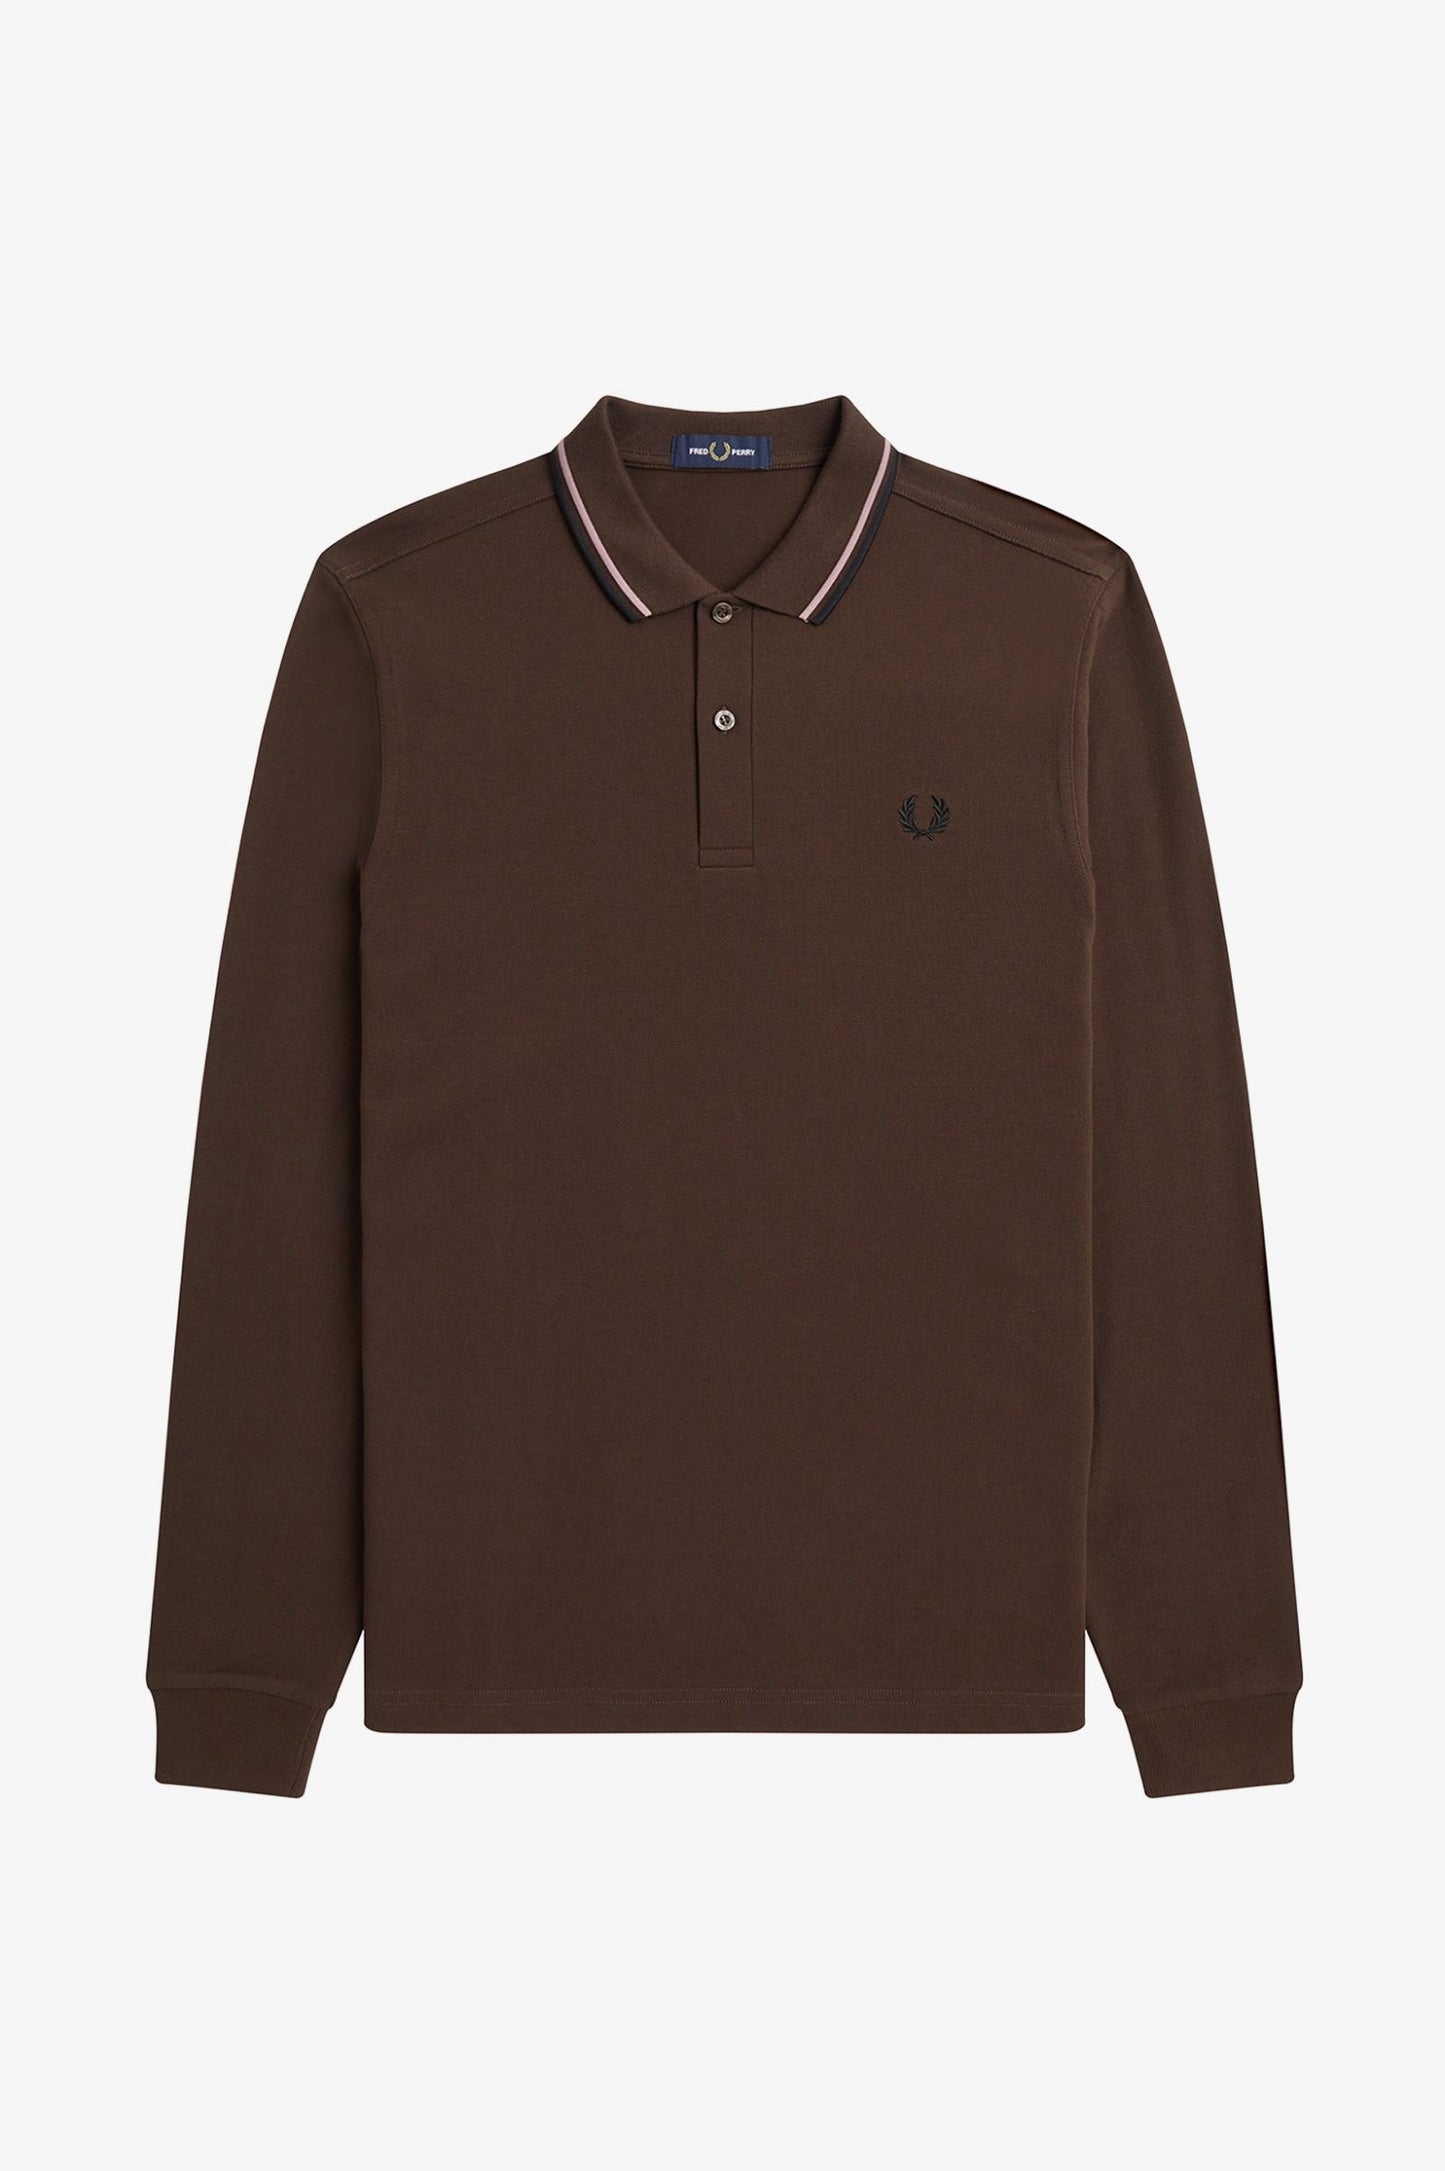 m tops - FRED PERRY - Long Sleeve Twin Tipped Shirt - PLENTY